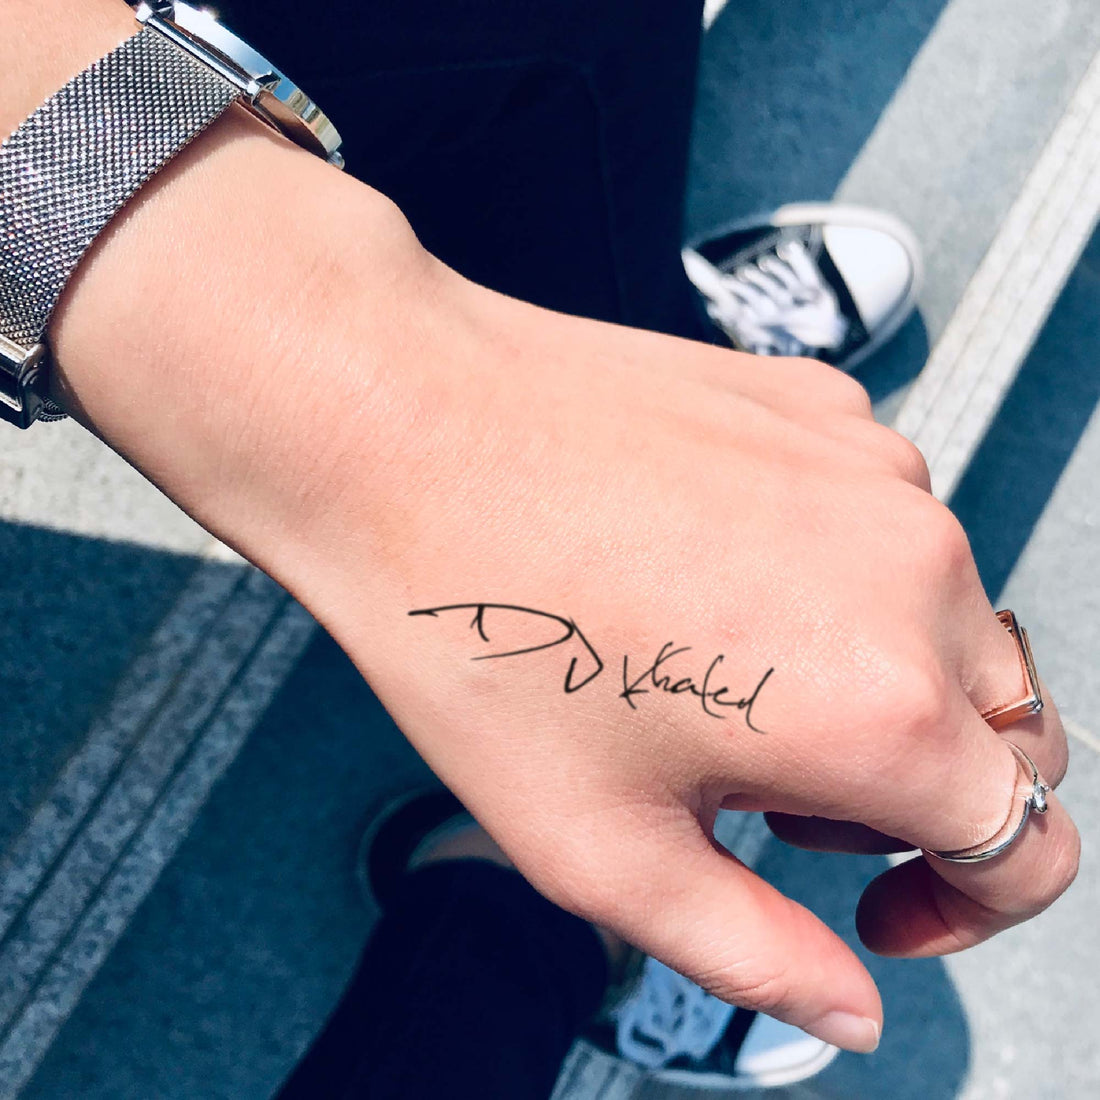 DJ Khaled custom temporary tattoo sticker design idea inspiration meanings removal arm wrist hand words font name signature calligraphy lyrics tour concert outfits merch accessory gift souvenir costumes wear dress up code